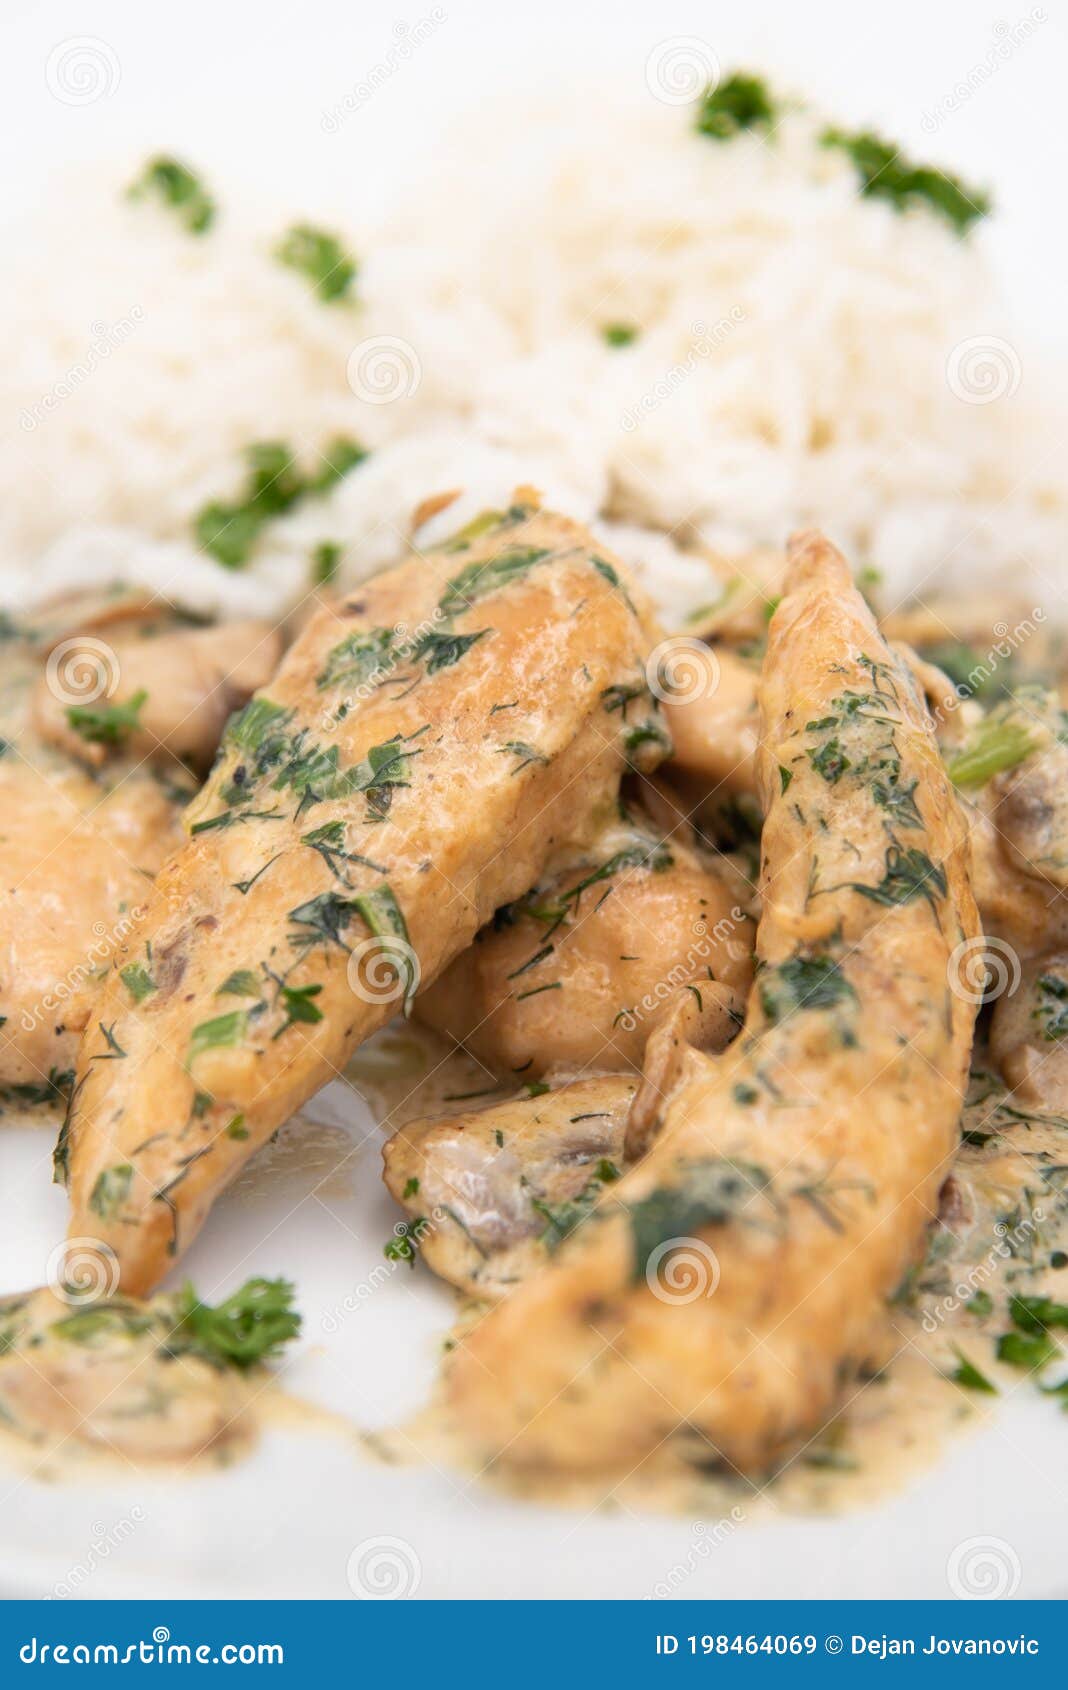 Creamy Herb Mushroom Chicken with Steamed Rice Closup Stock Image ...